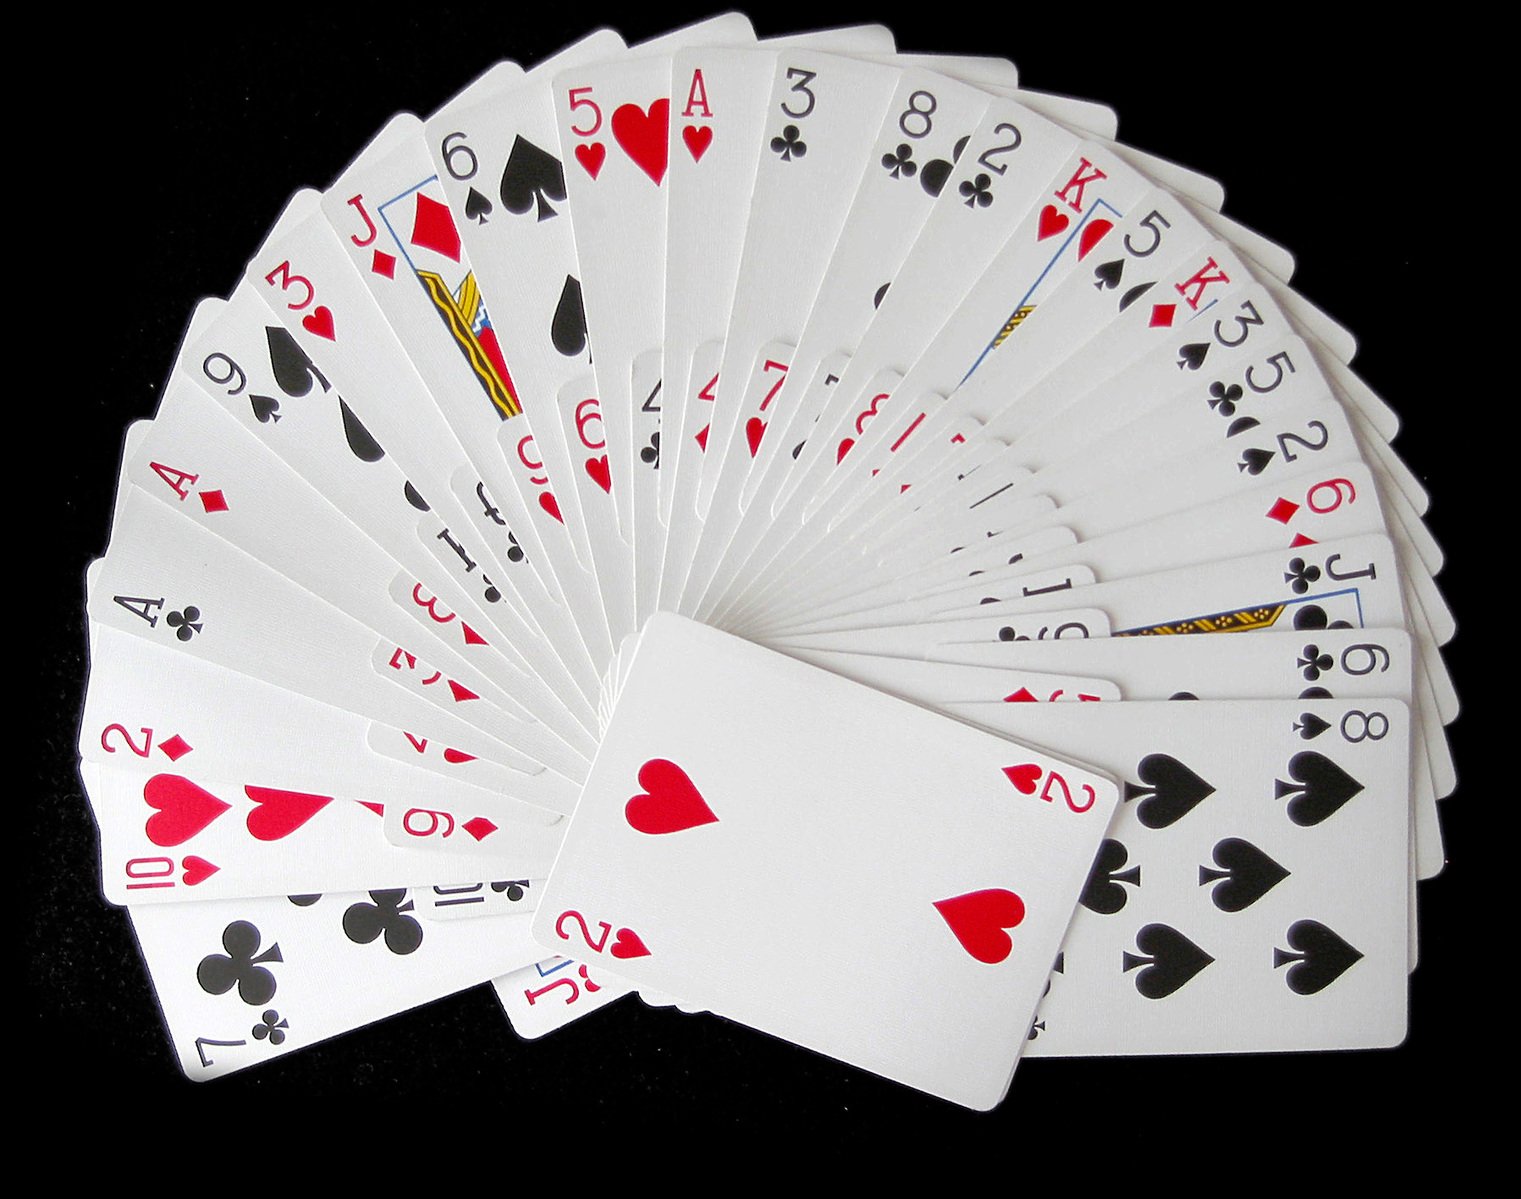 the set of poker cards on a black surface